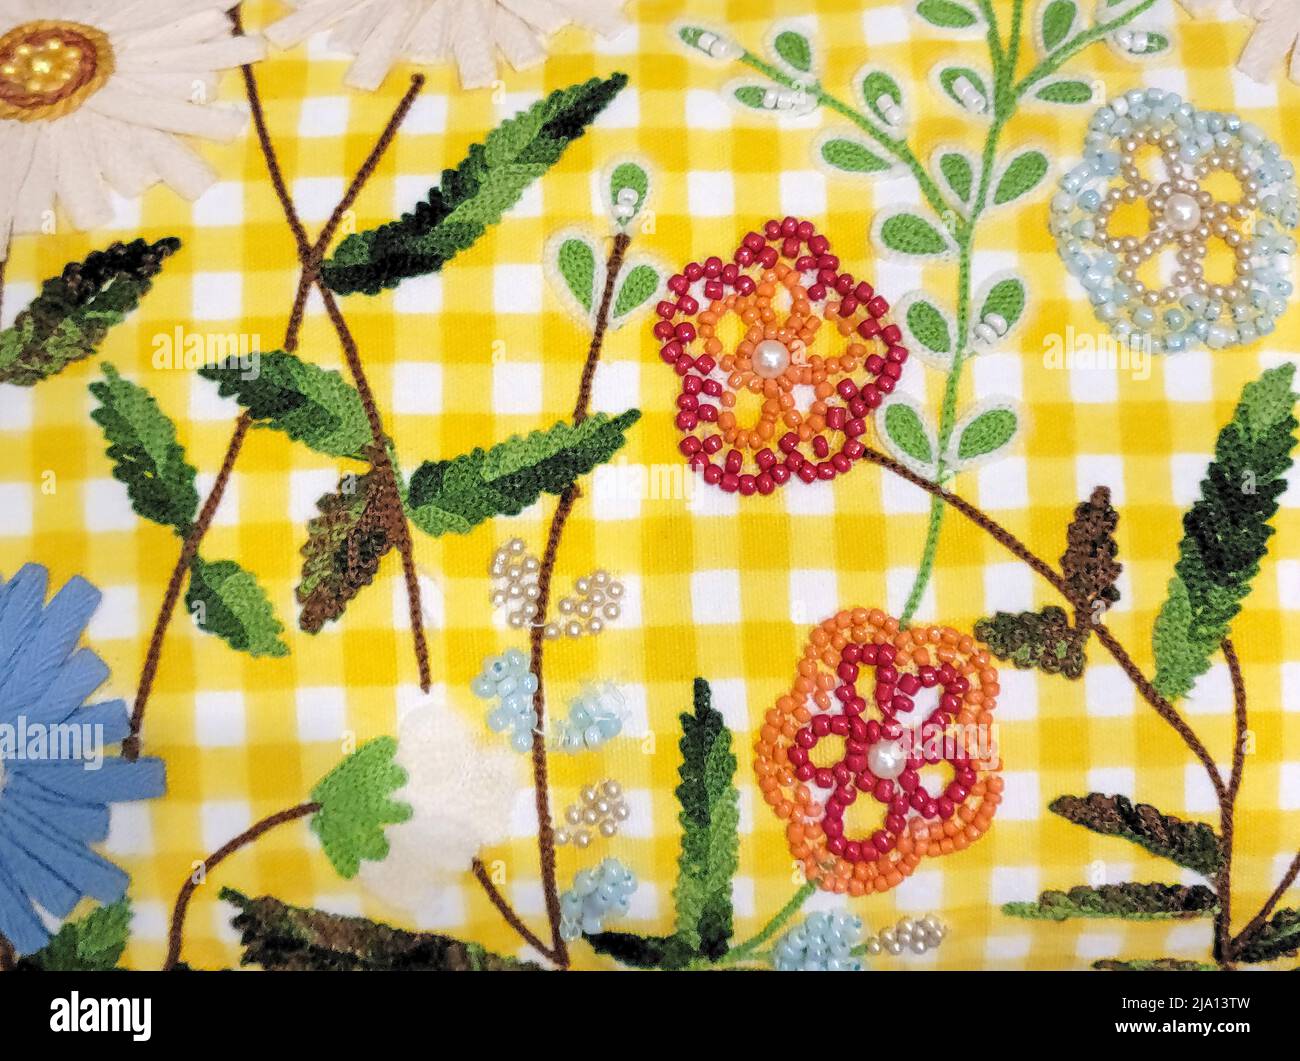 Floral embroidery design on white and yellow gingham with beads Stock Photo